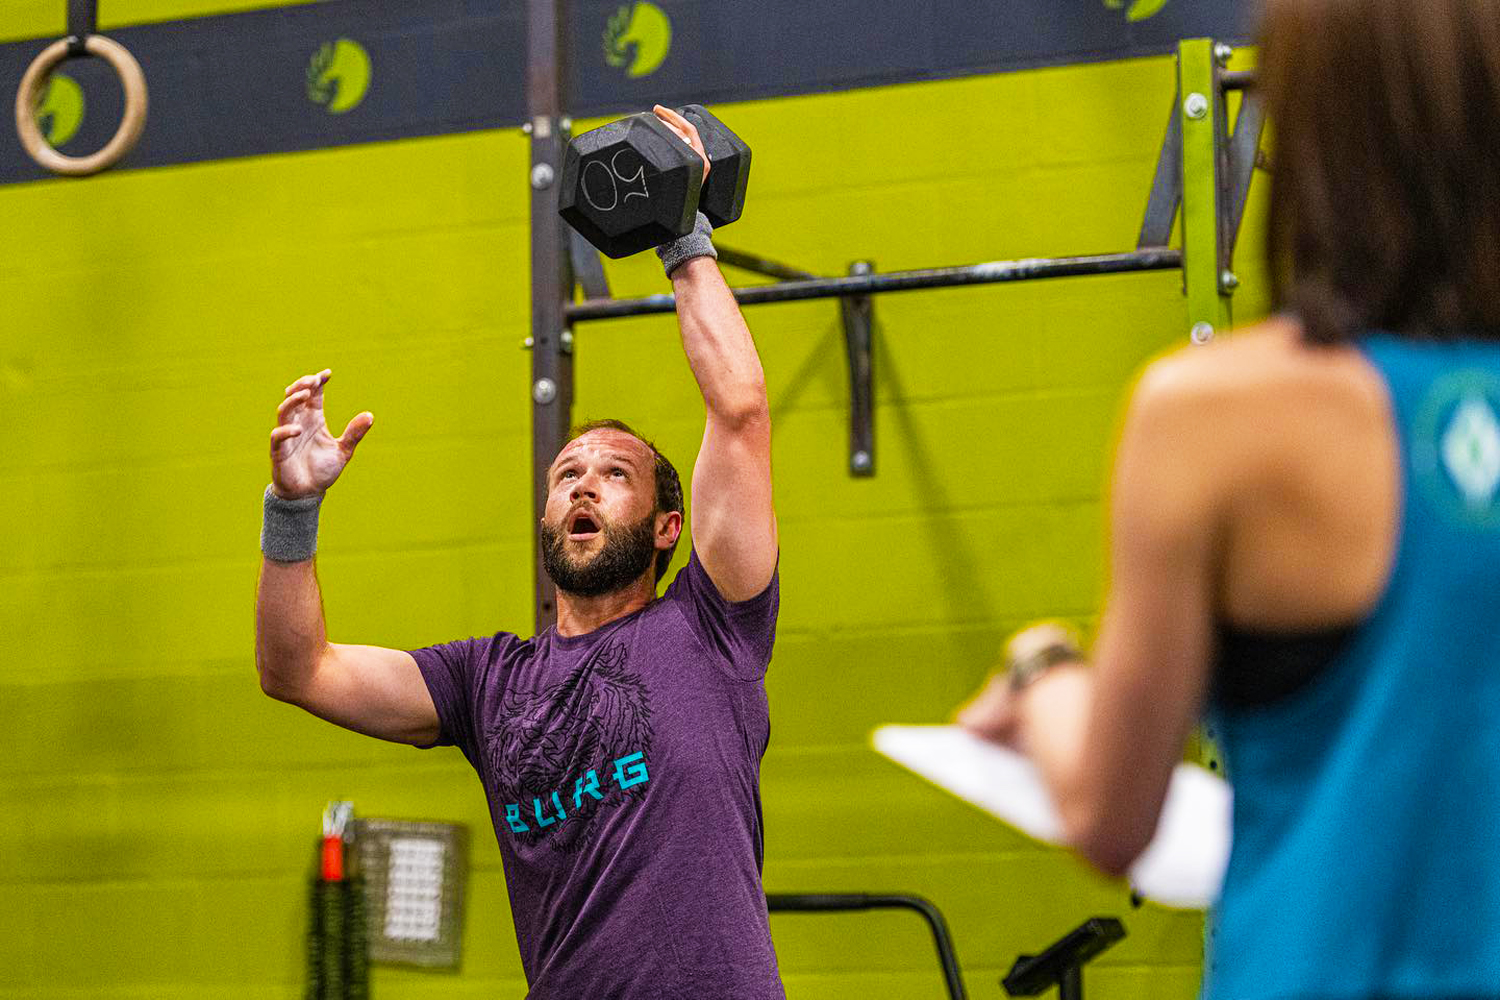 What is CrossFit? And is it right for you? Here's what you need to know